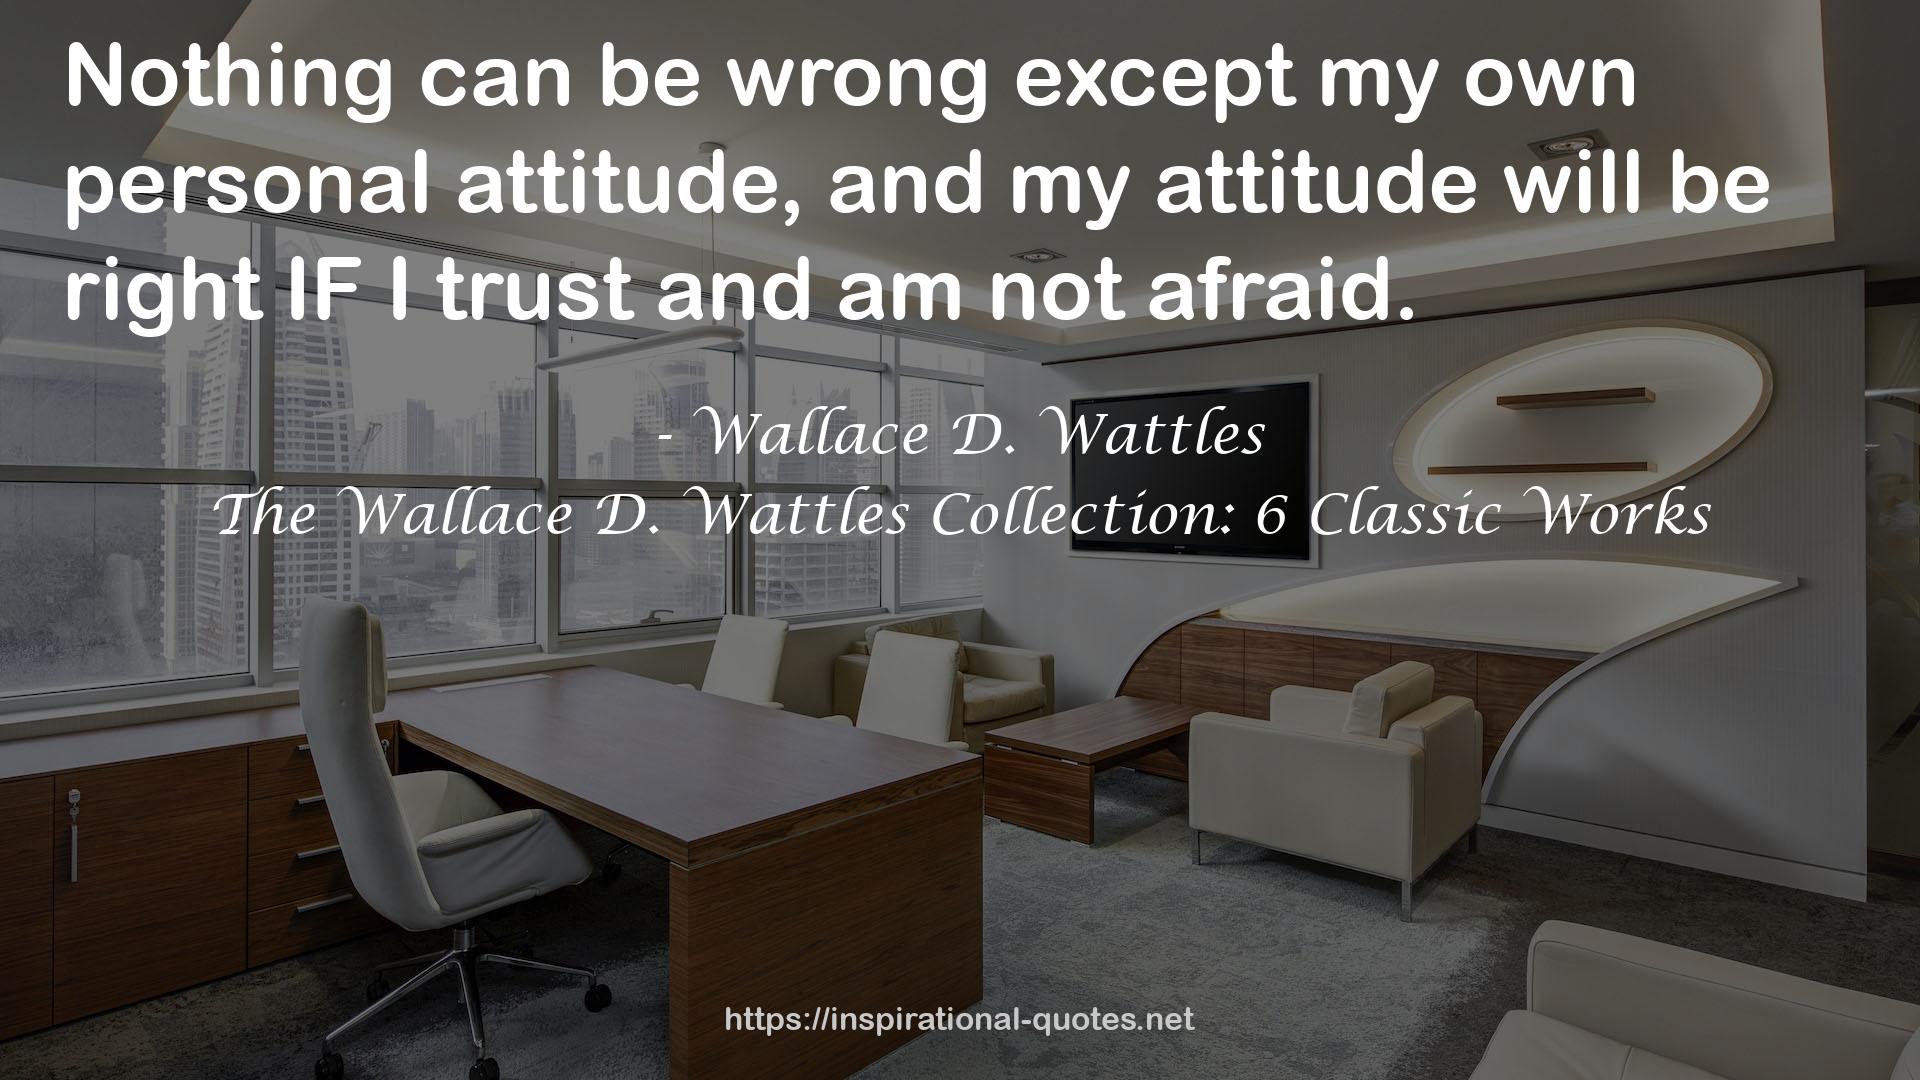 The Wallace D. Wattles Collection: 6 Classic Works QUOTES